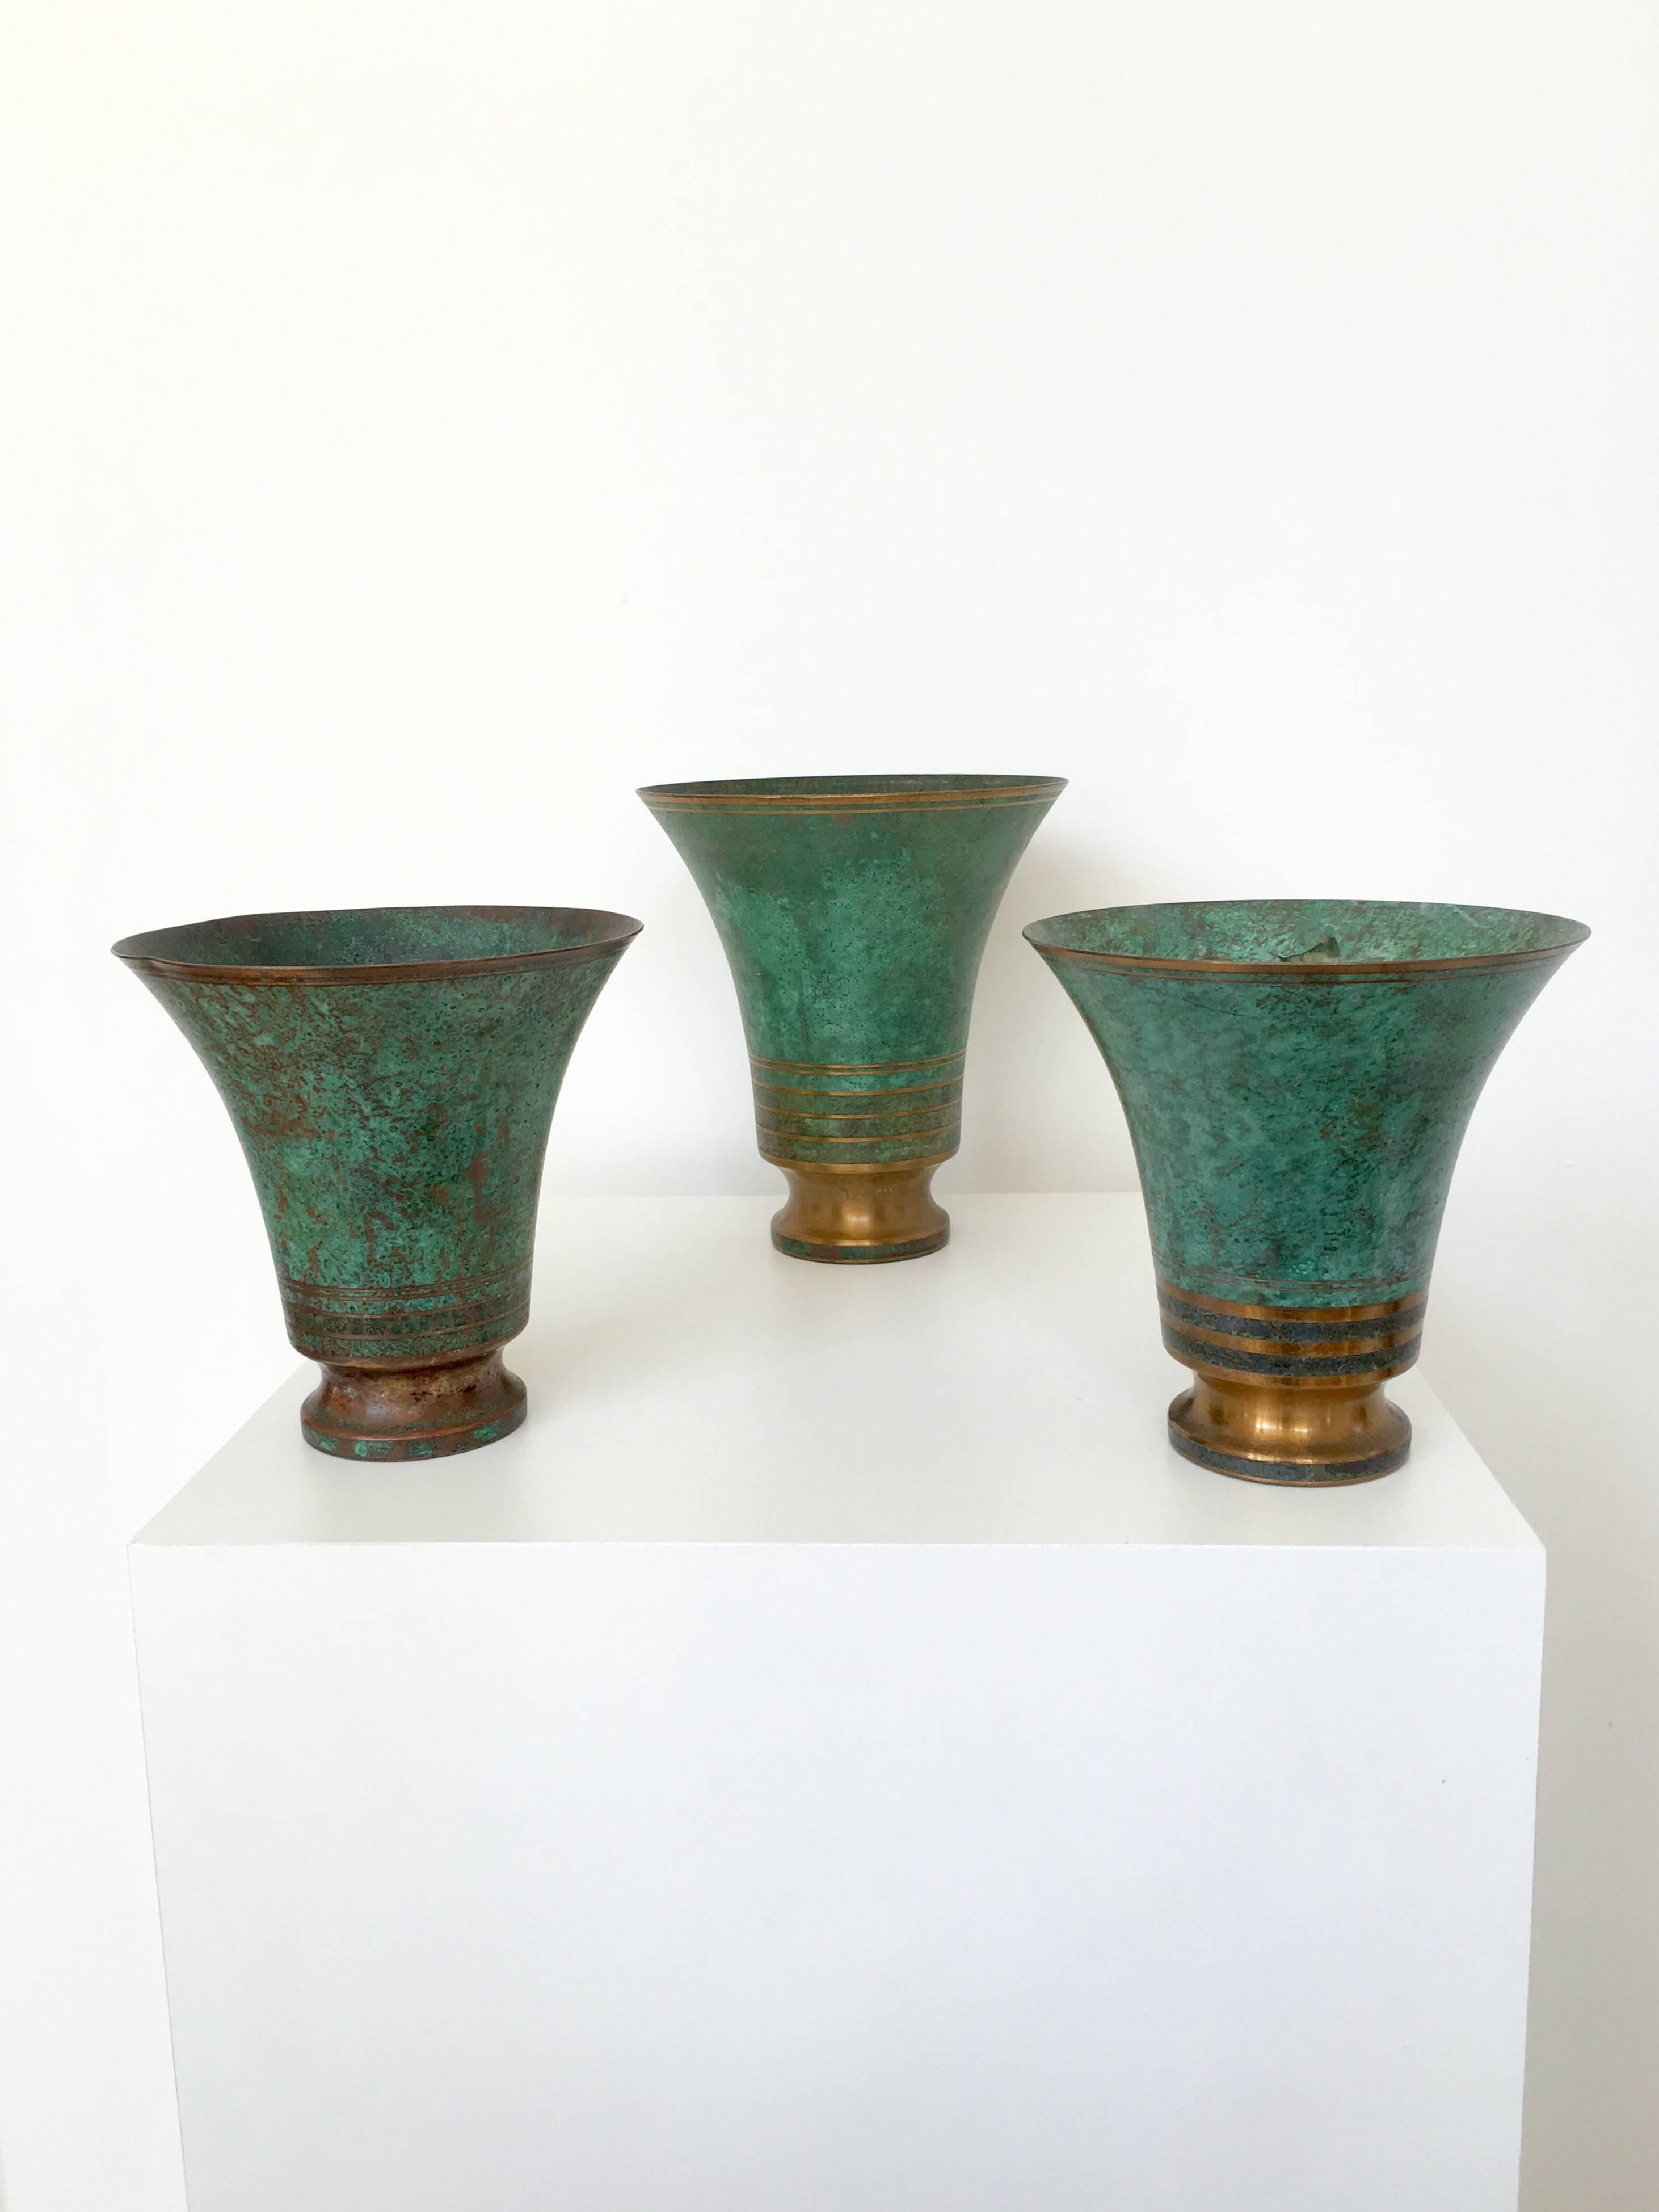 With their gorgeous verdigris patina, these bronze vases by Carl Sorensen are optimal in their size and form creating a striking collection. All three vases have the 